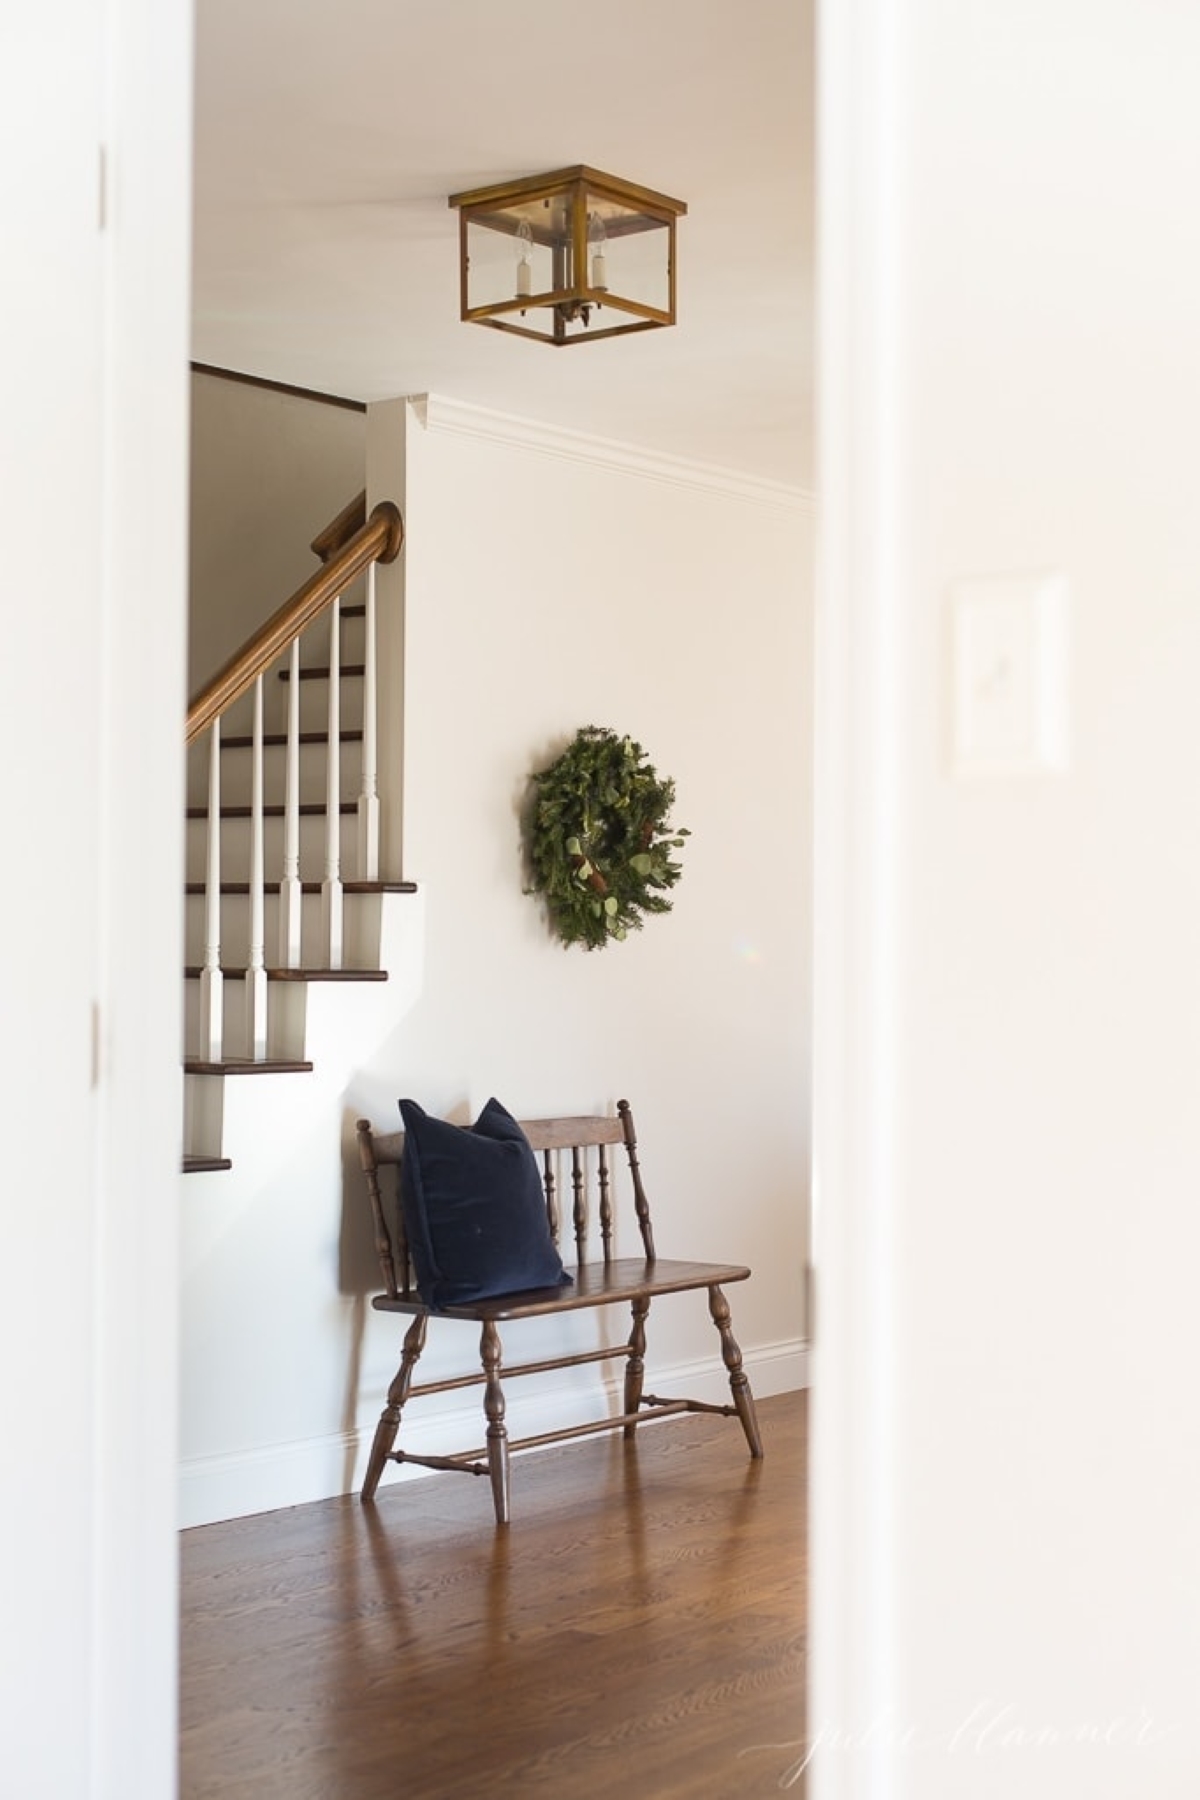 A Christmas wreath placed over a wooden bench in the entryway of a home